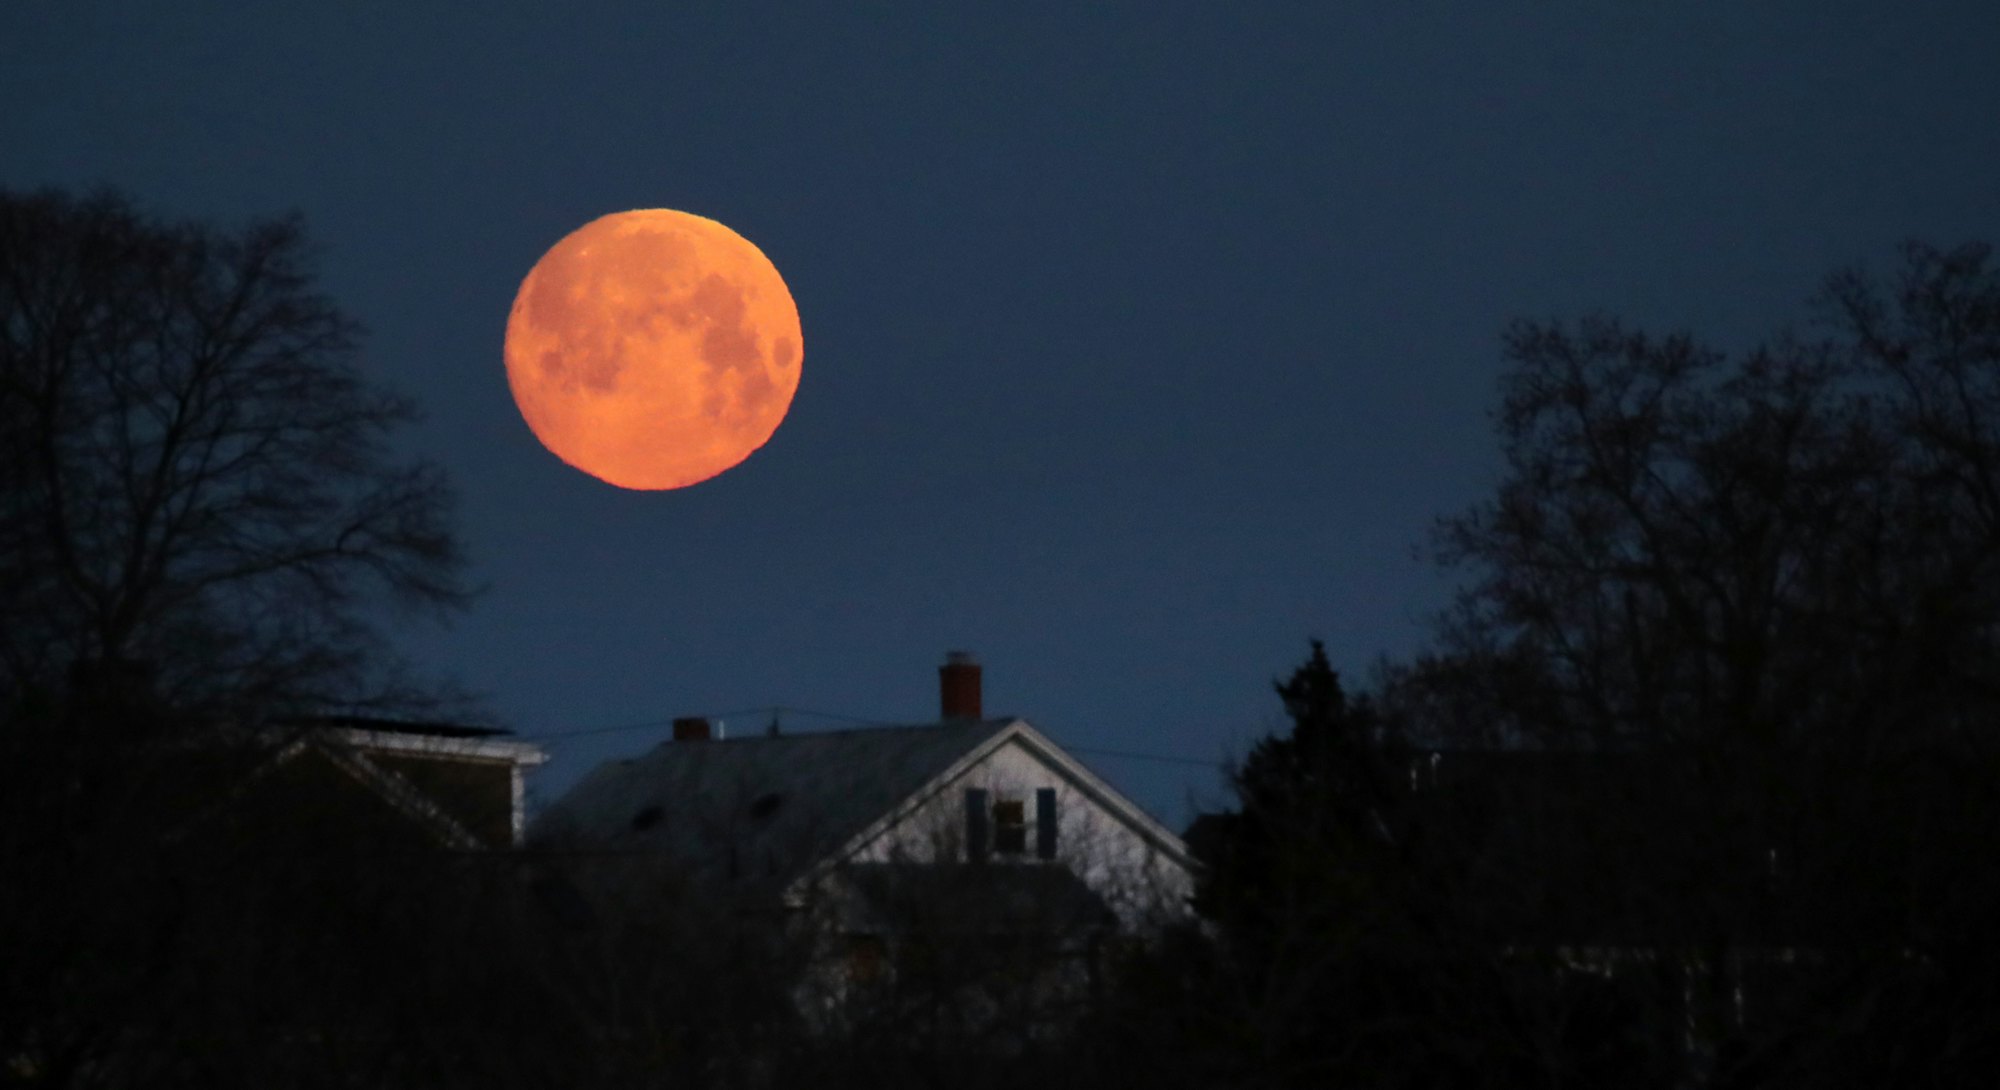 The full blood moon arrives on Oct. 9 in fearless Aries.